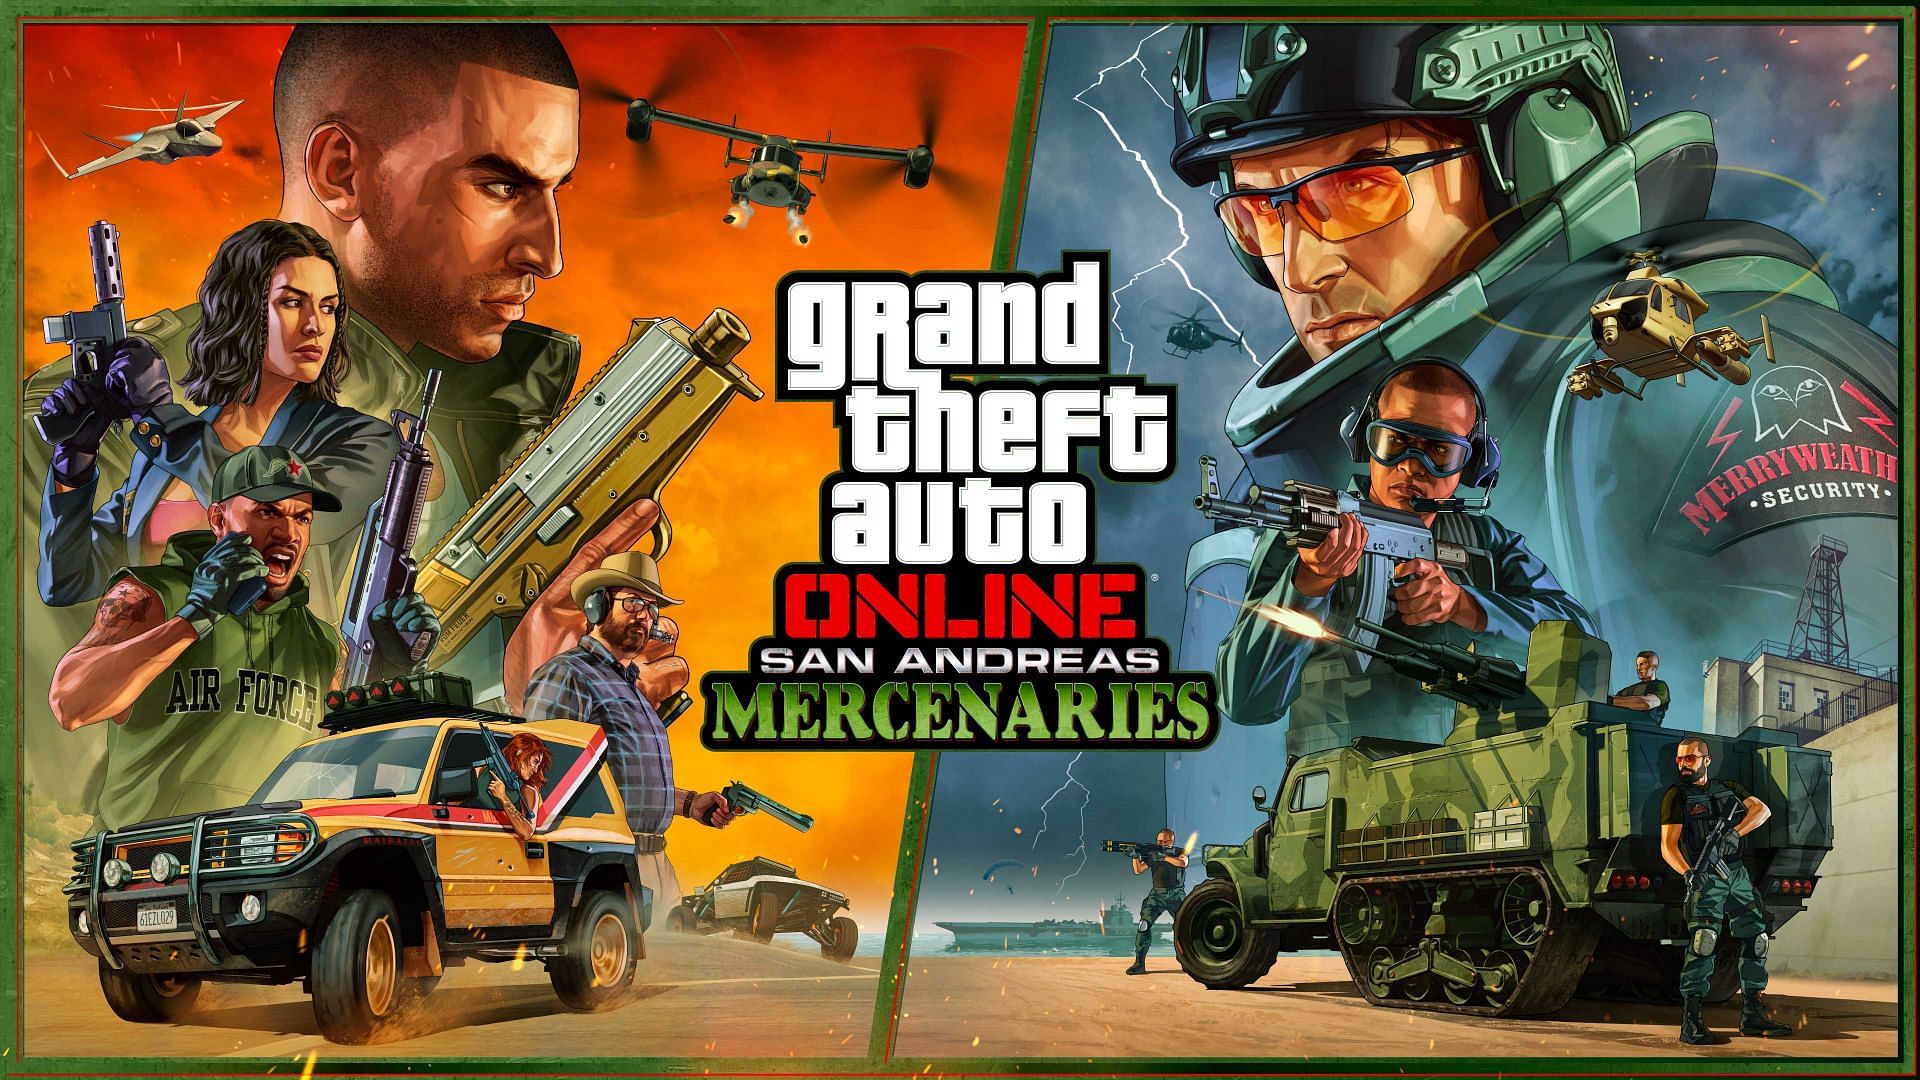 San Andreas Mercenaries was the most recent patch when this article was written (Image via Rockstar Games)